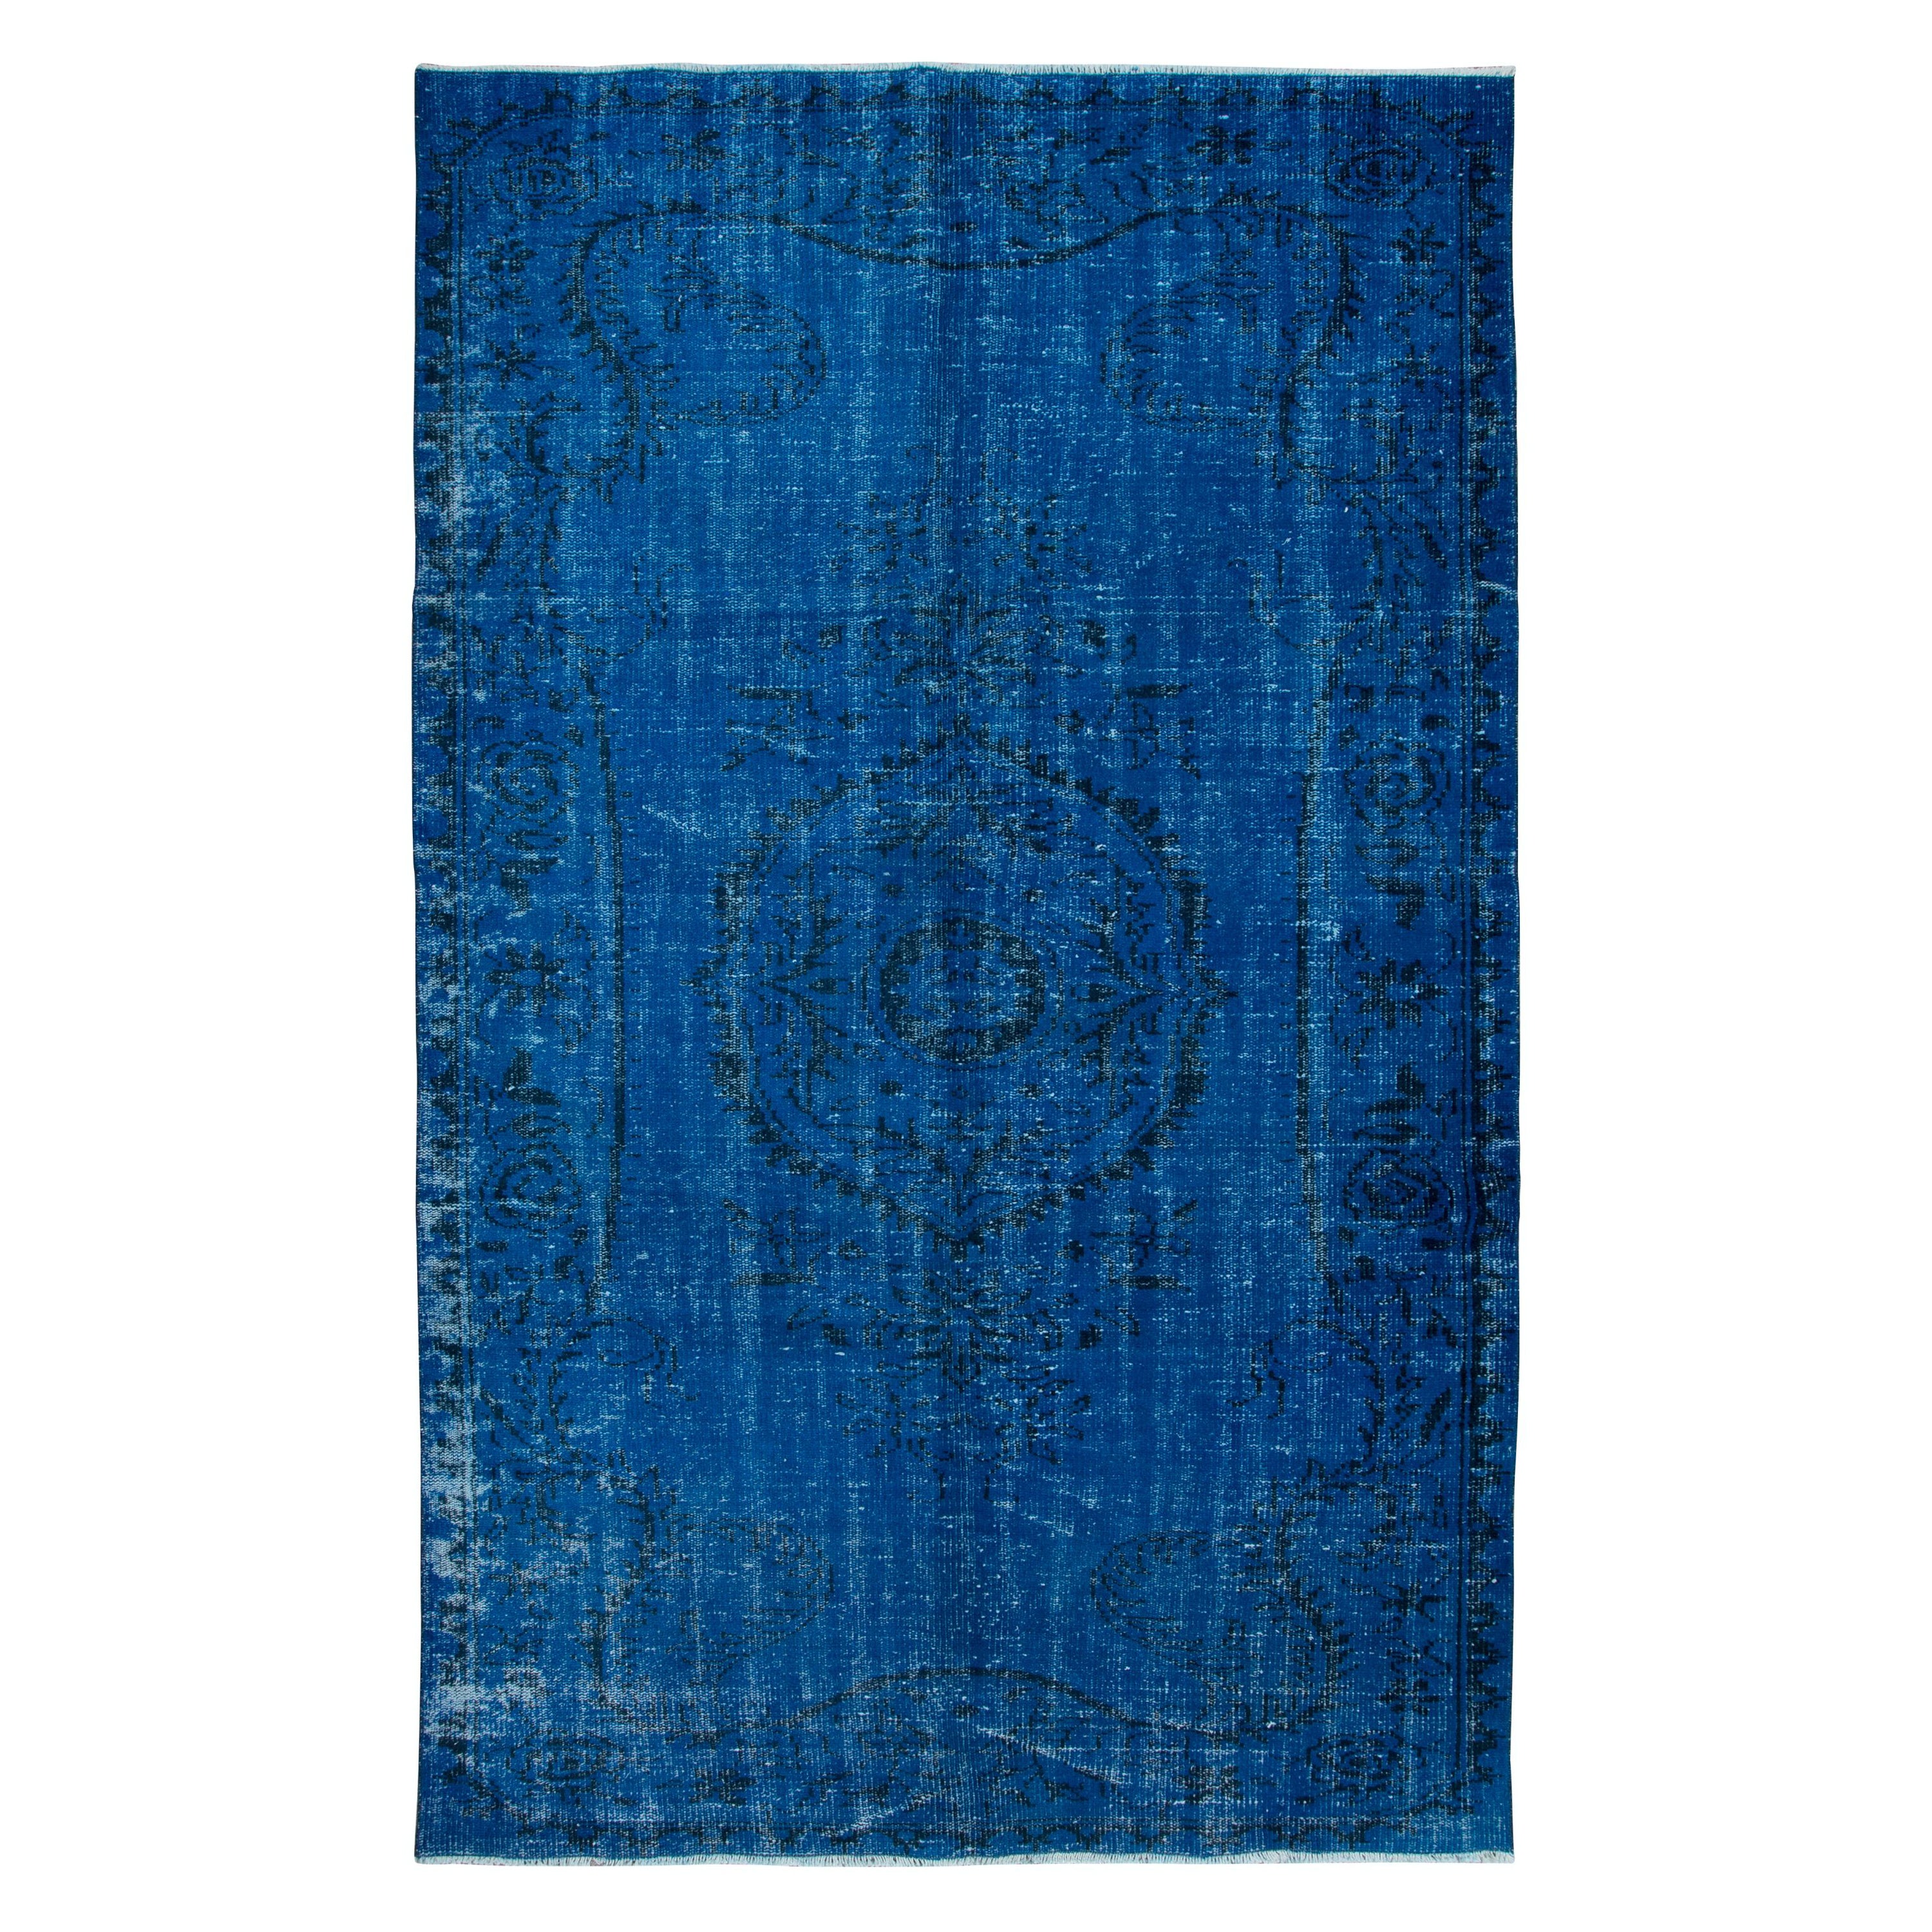 5.5x9 Ft Blue Overdyed Wool Area Rug, Handmade in Turkey, Modern Upcycled Carpet